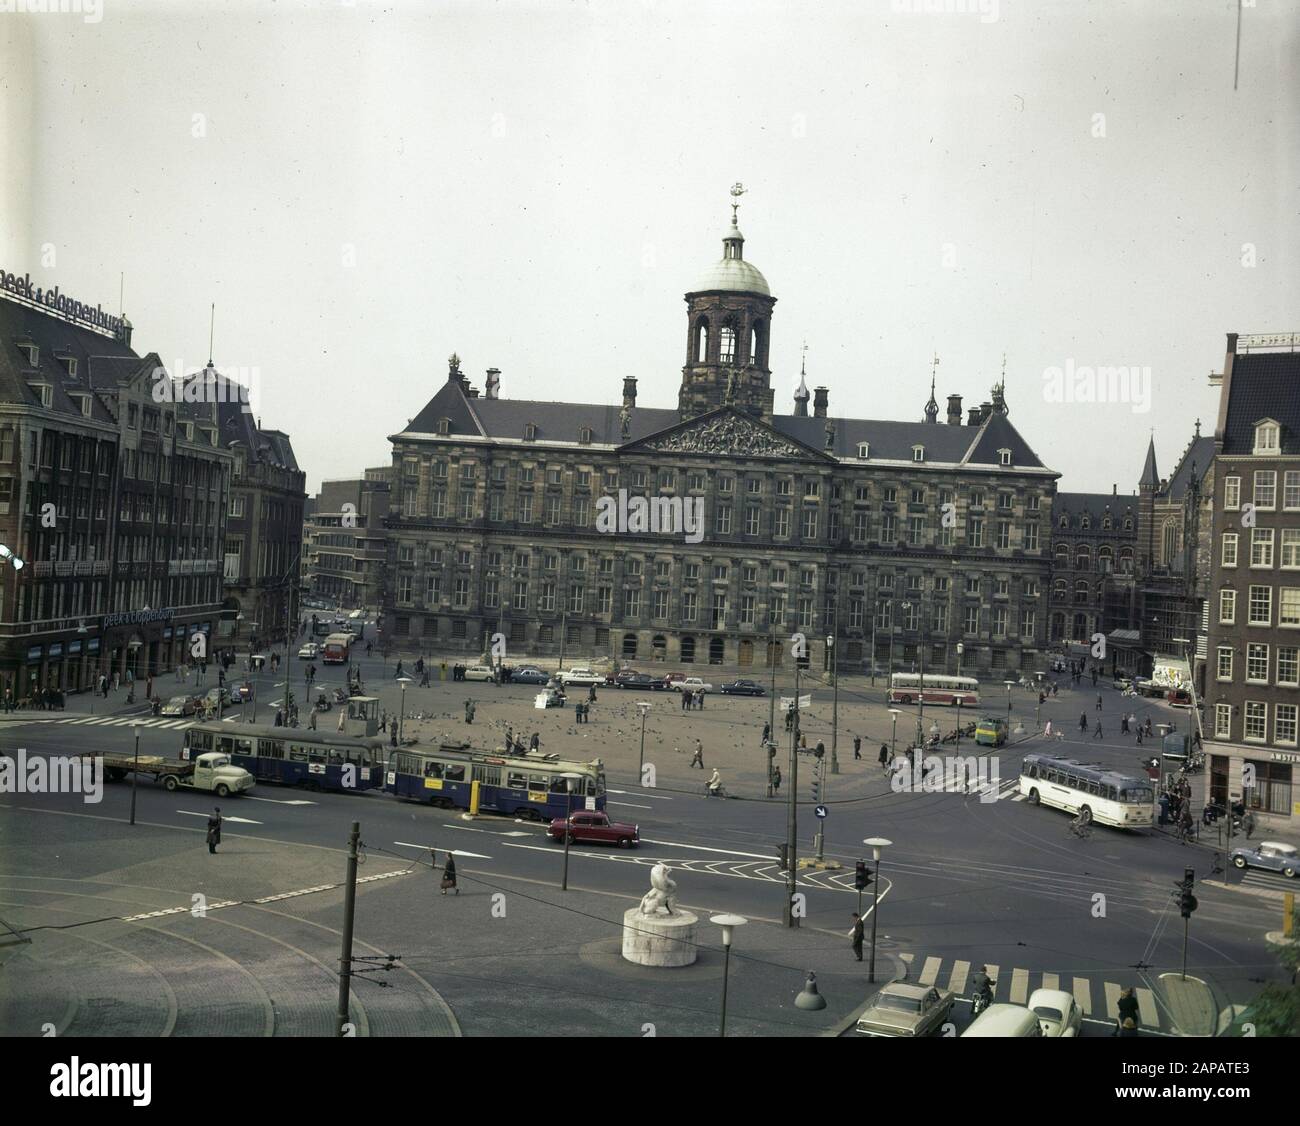 Amsterdam. Dam with the royal palace Date: 29 September 1965 Location: Amsterdam, Noord-Holland Keywords: Baroque, classicism, domes, palaces, squares, cityscapes, trams, traffic Institution name: Palace on the Dam Stock Photo